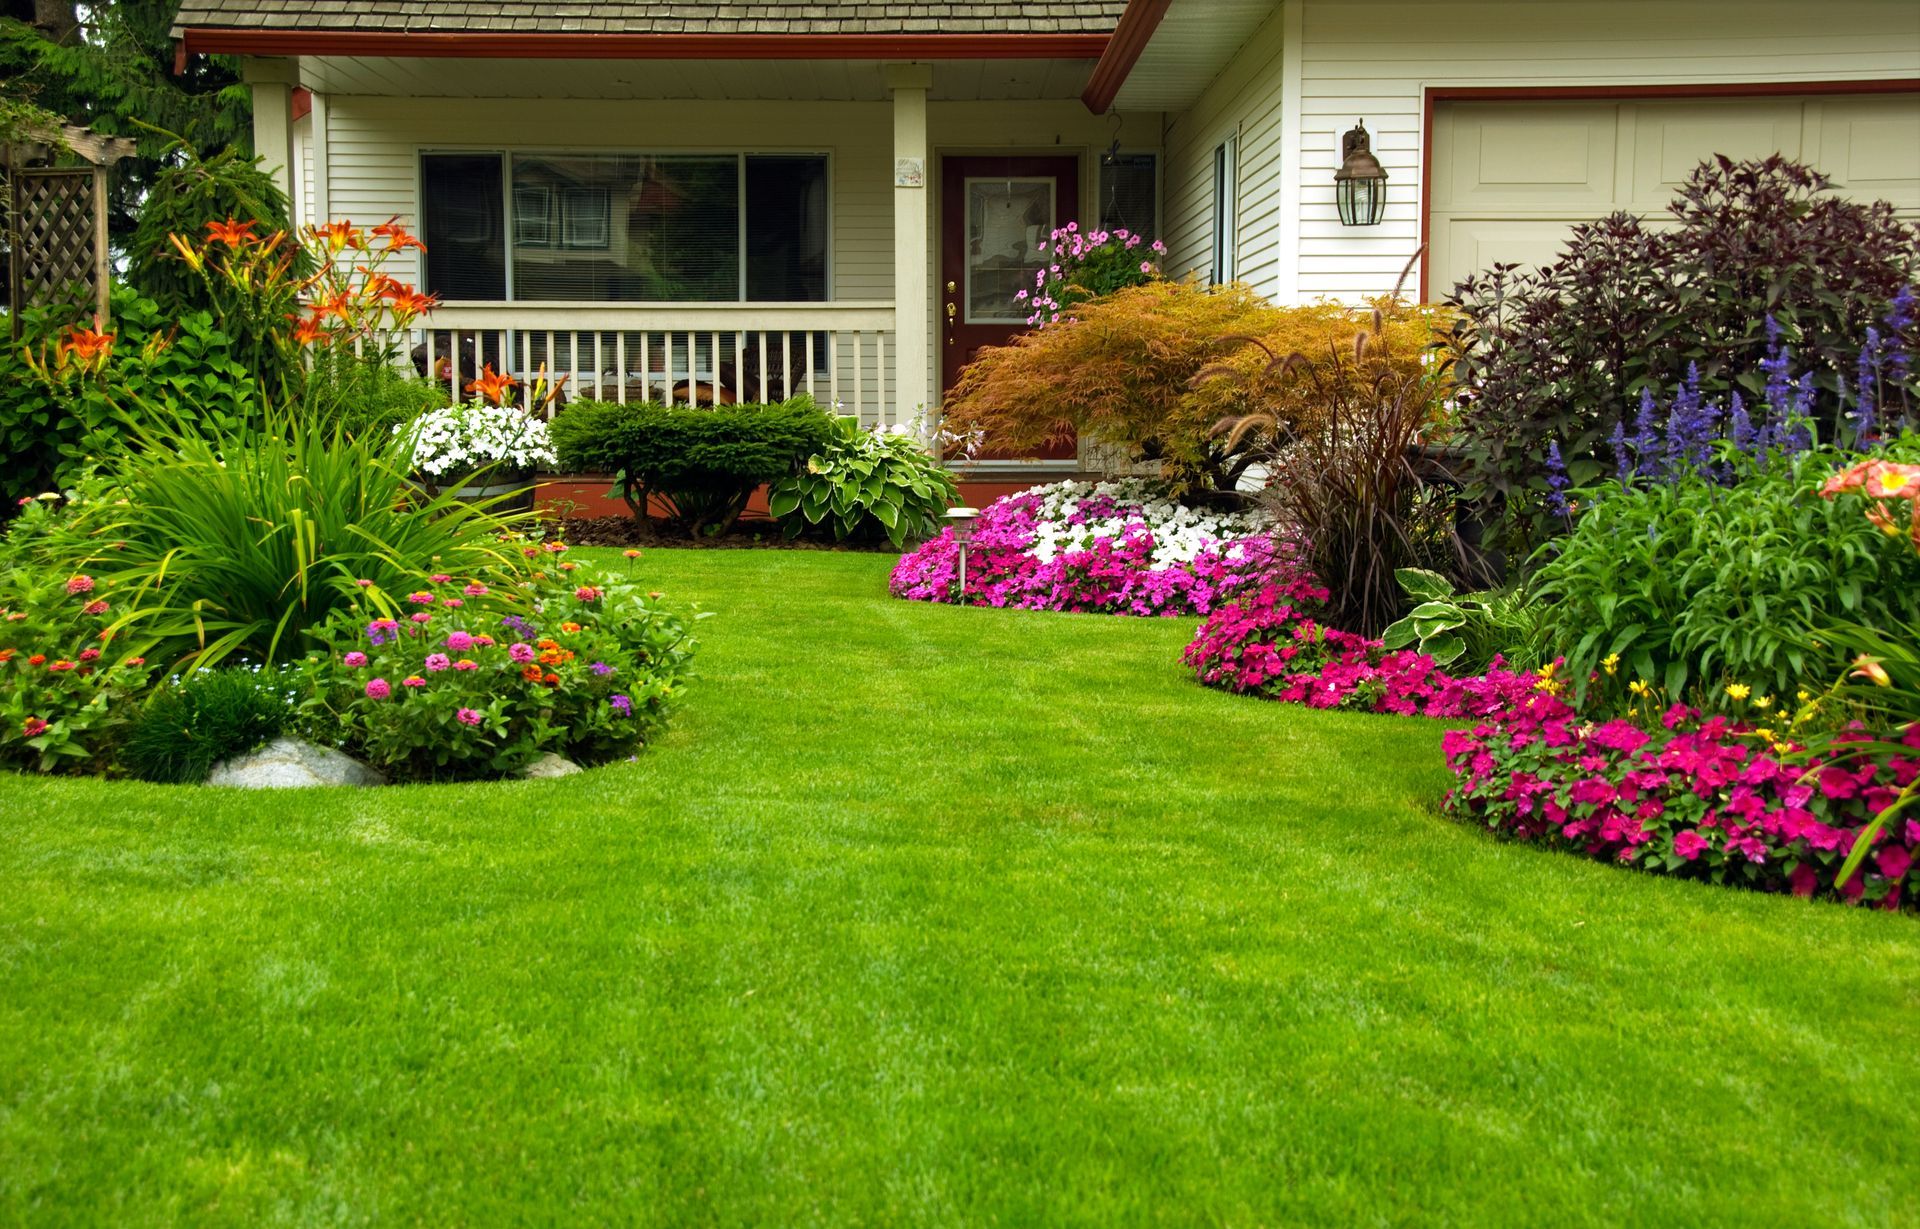 Vibrant manicured lawn and garden in full bloom, showcasing the beauty of spring and summer in a residential yard.